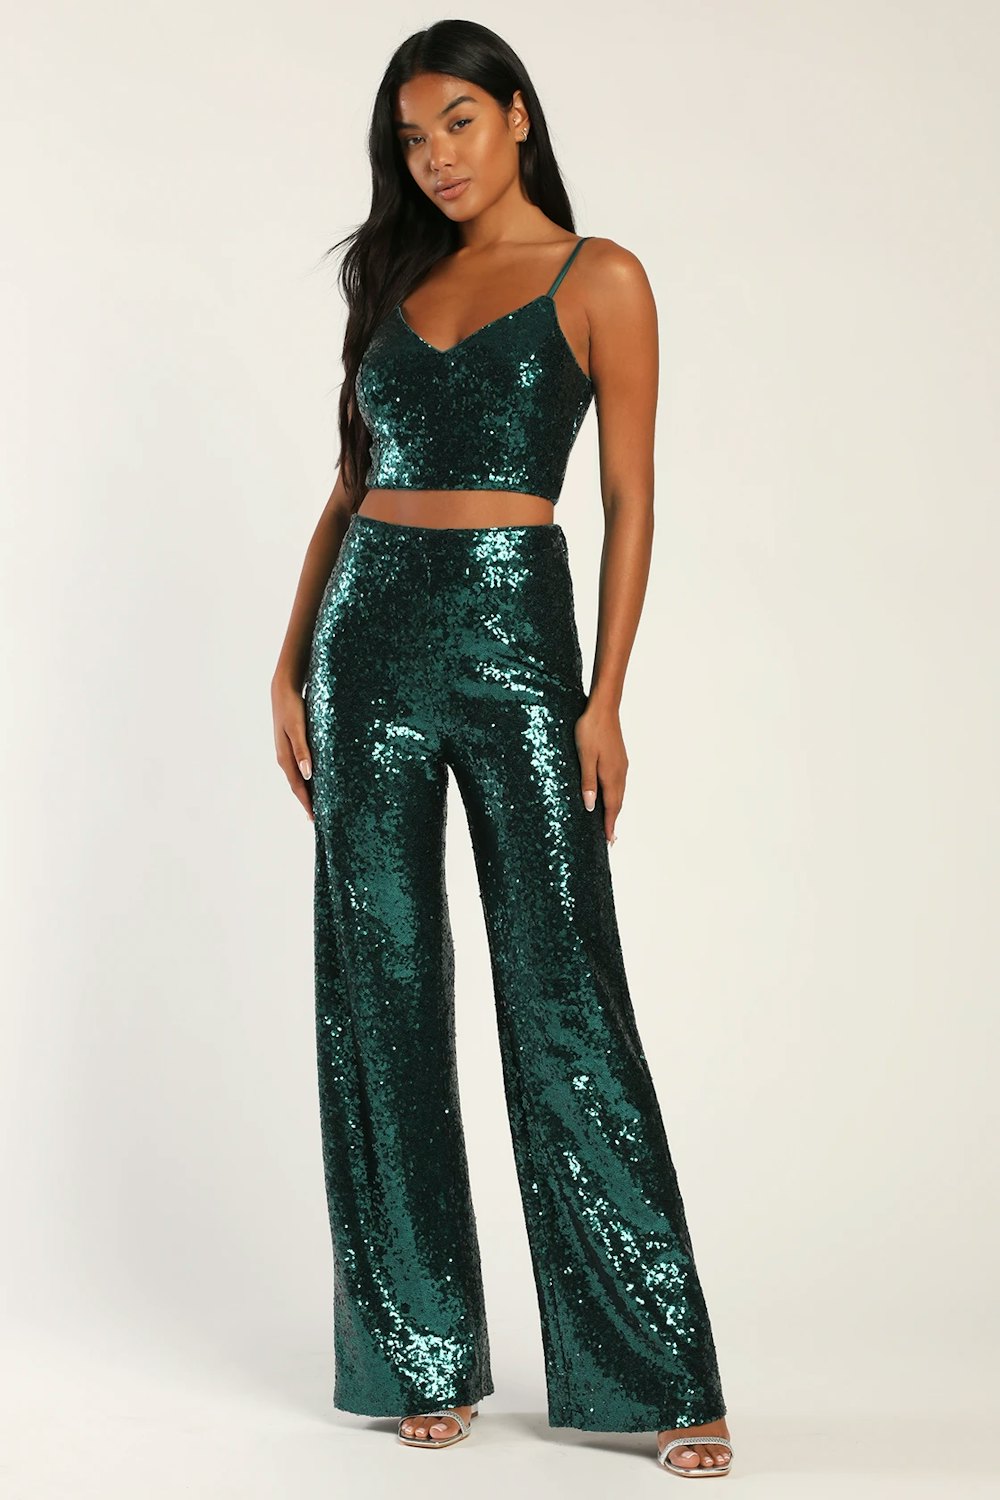 Twice the Glam Teal Green Sequin Lace-Up Two-Piece Jumpsuit